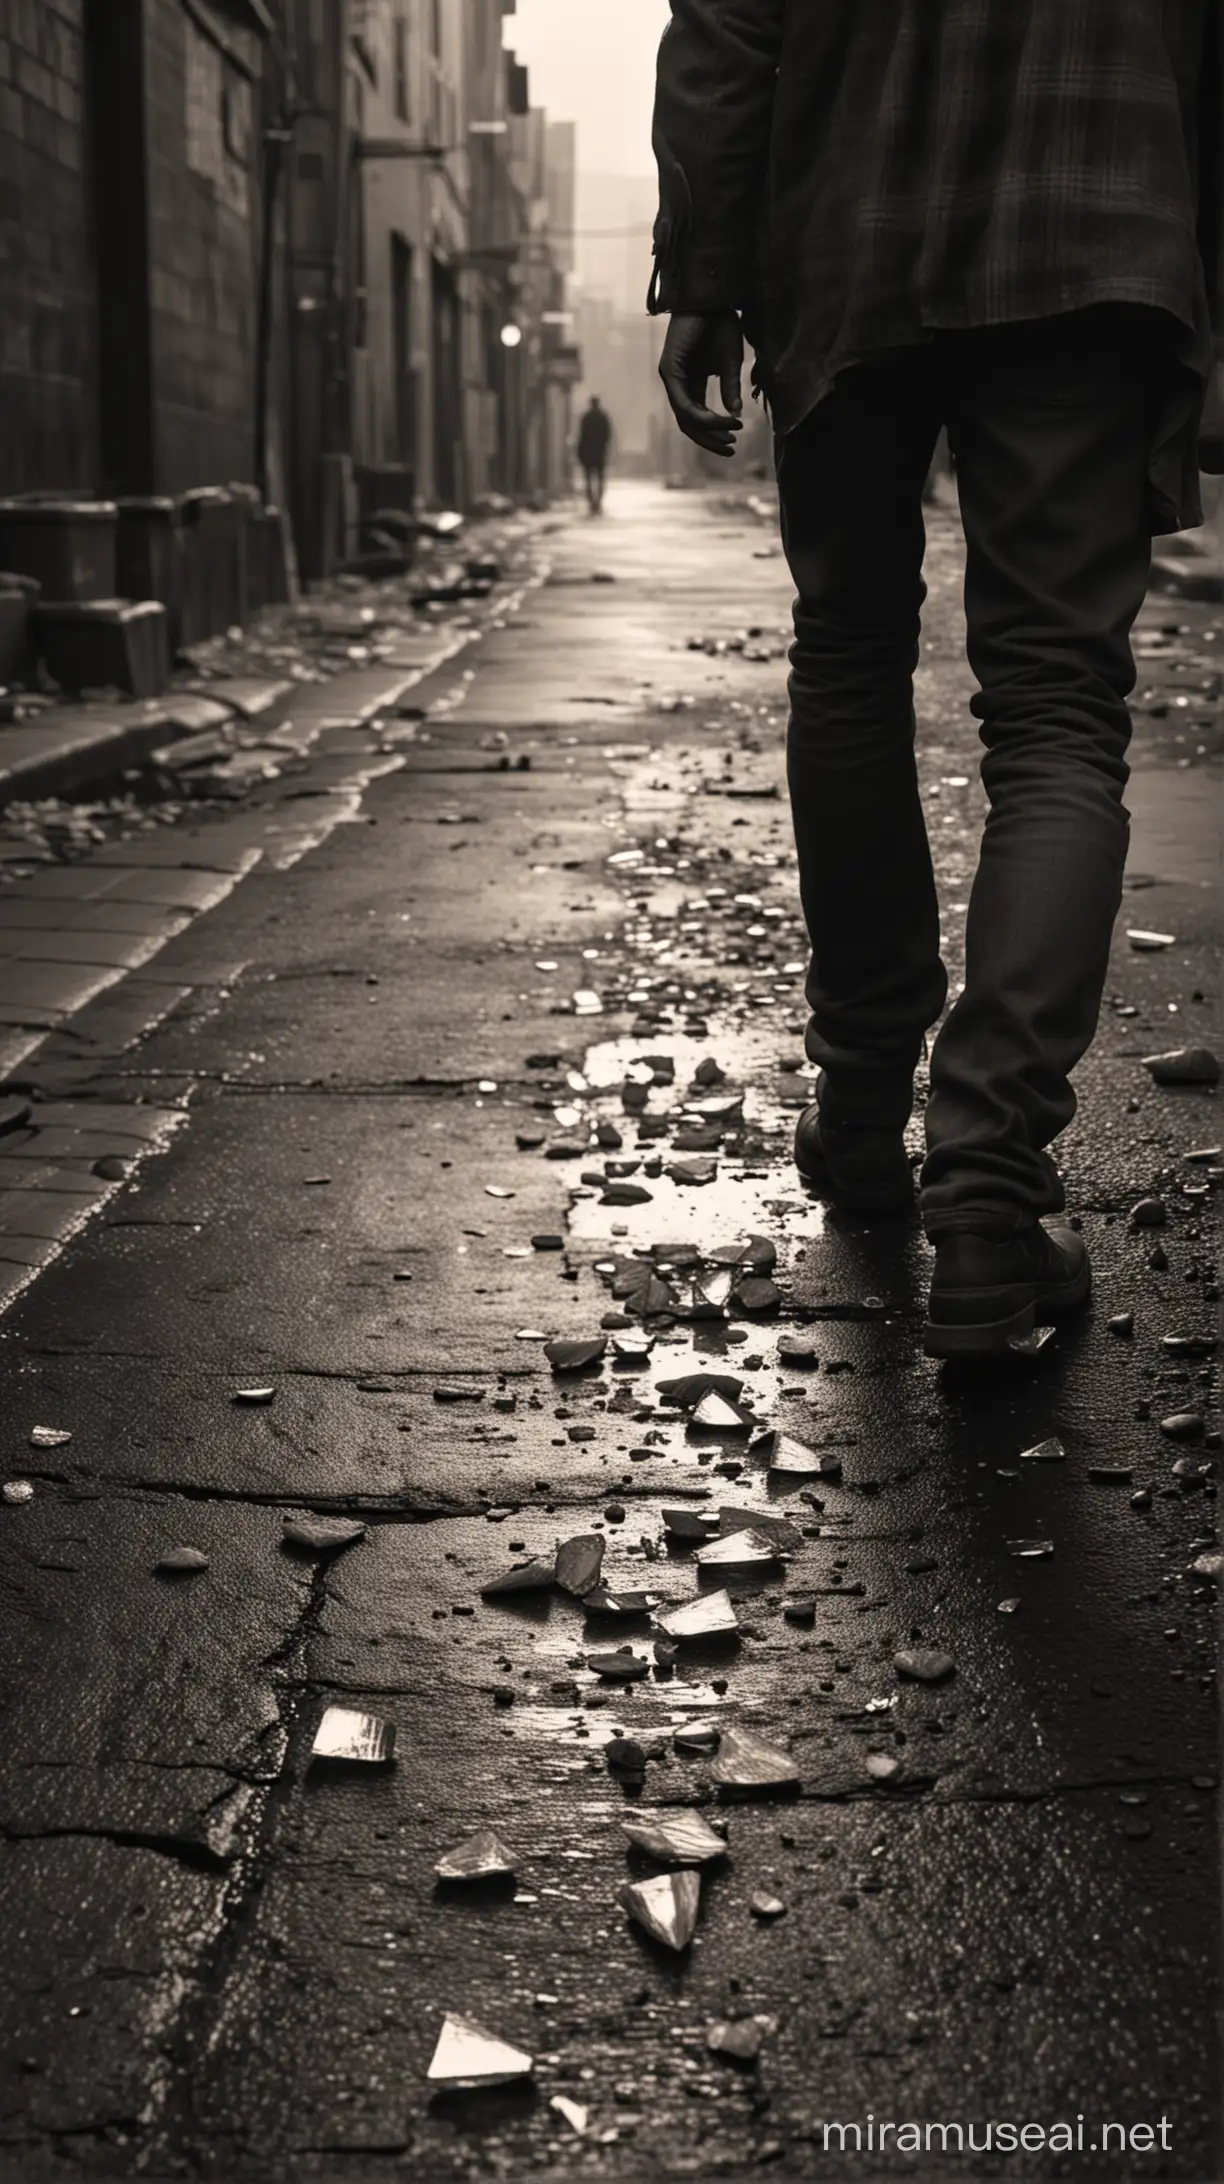 Desperate Man Walking Alone in Dimly Lit Alley with Spilled Coffee Cups